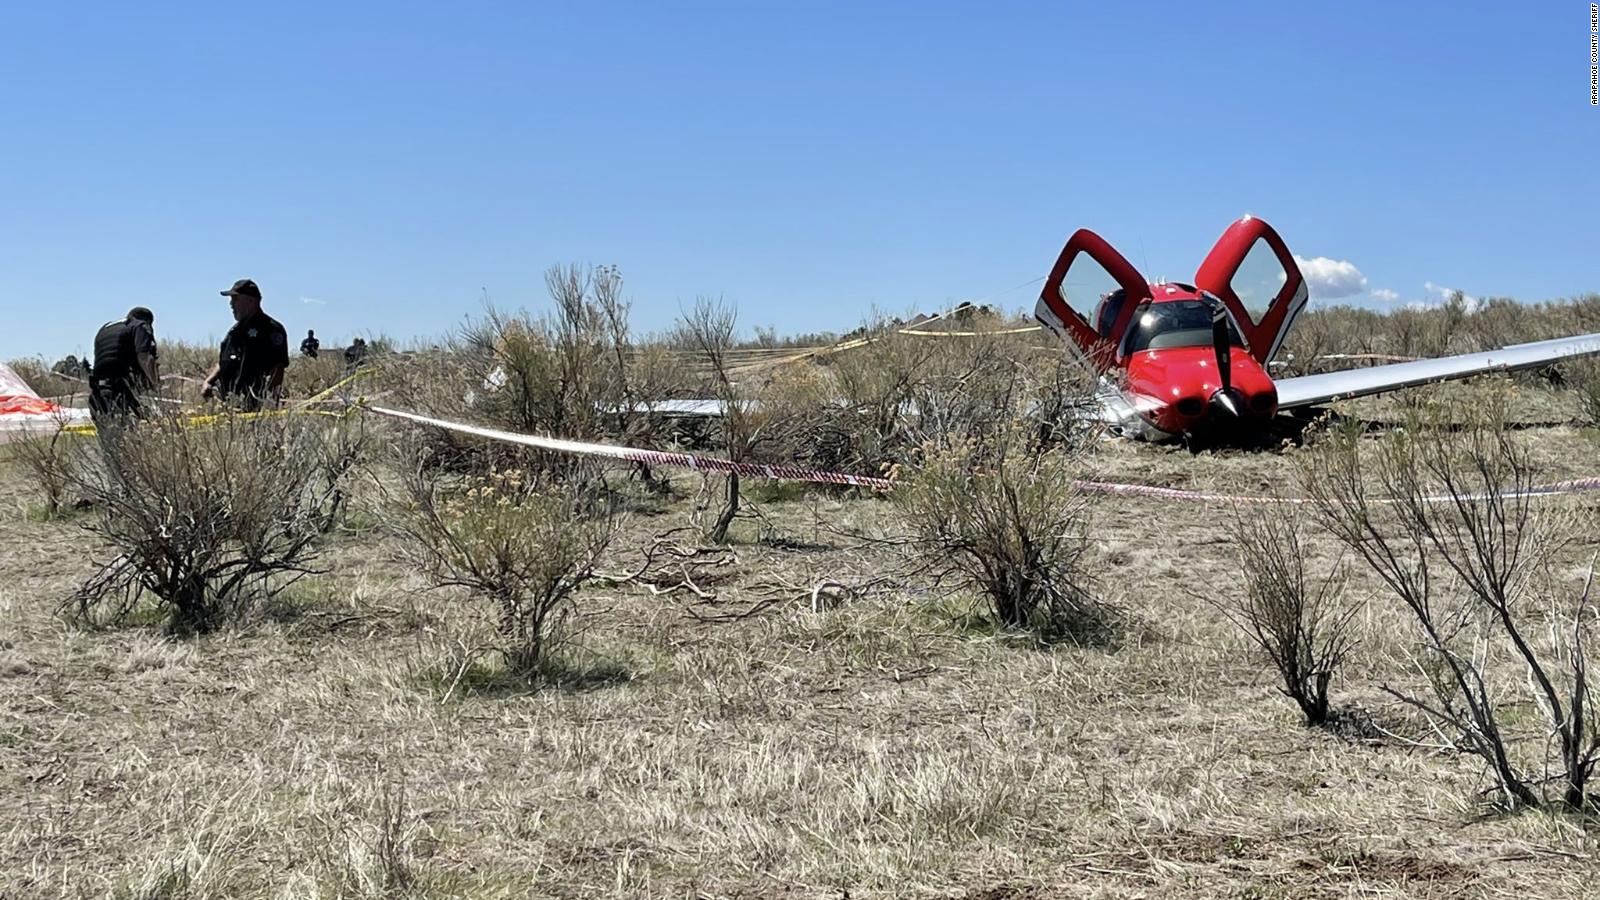 Colorado plane collision Two small planes hit each other midair and